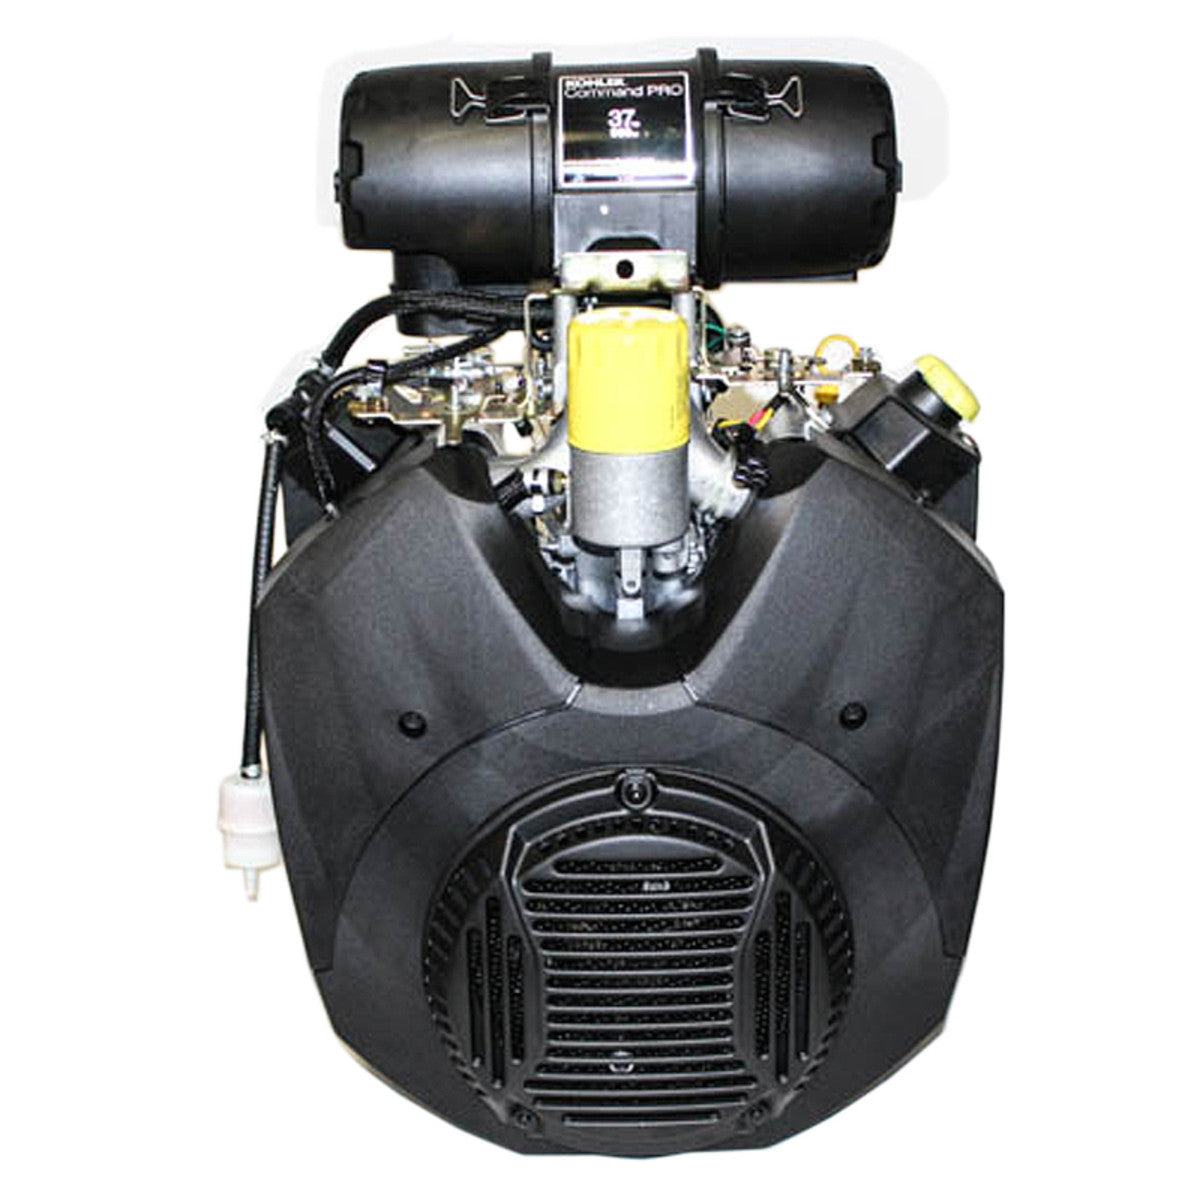 Kohler Command Pro 37HP Replacement Engine #CH1000-3000